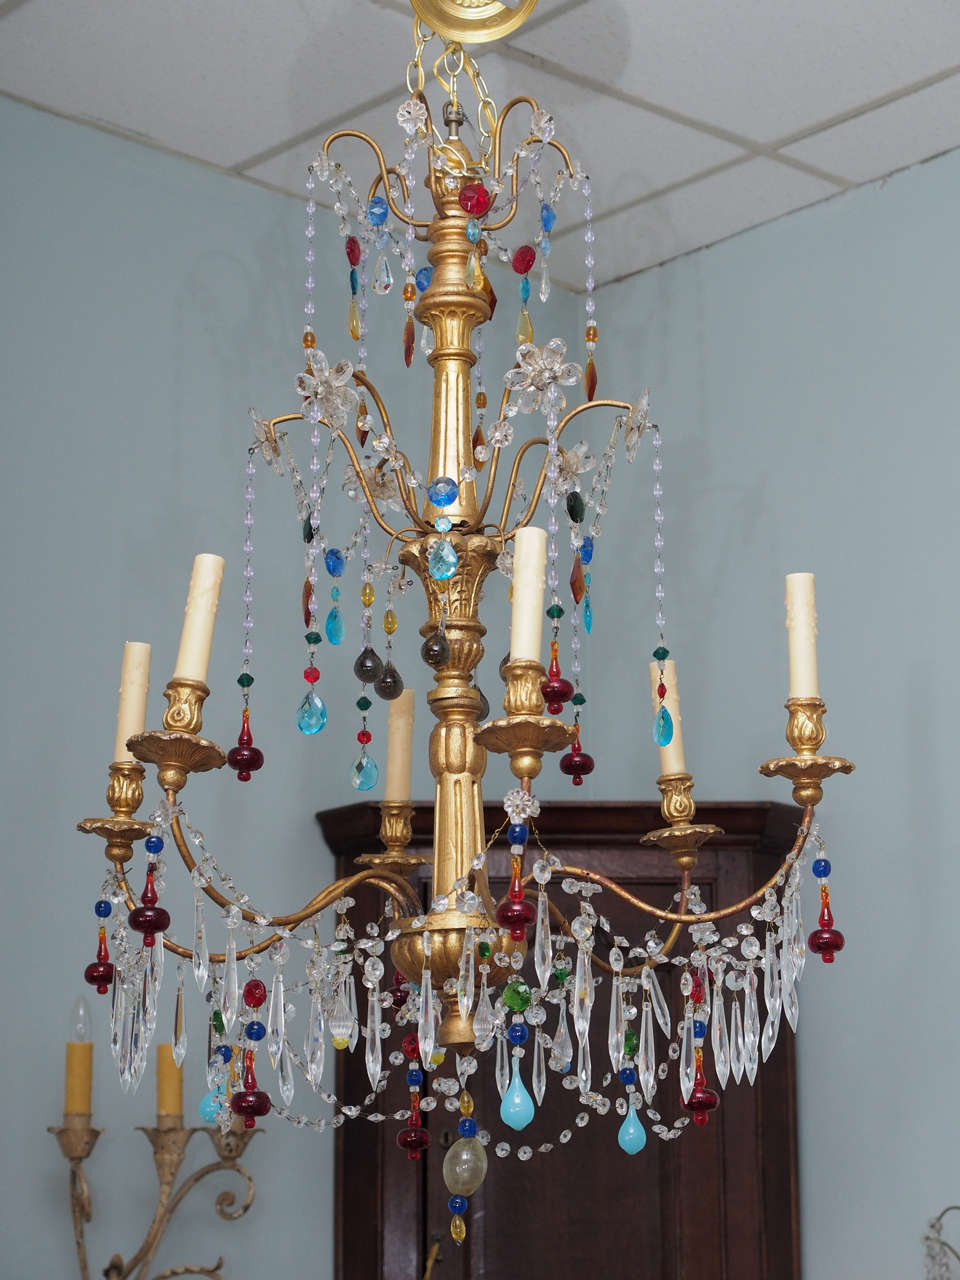 This elegant jewel of a Genovese chandelier is embellished with brightly colored and opaline Murano glass drops as well as clear crystals and was created in Italy, circa 1920. There is a carved giltwood central shaft with an upper finial and six